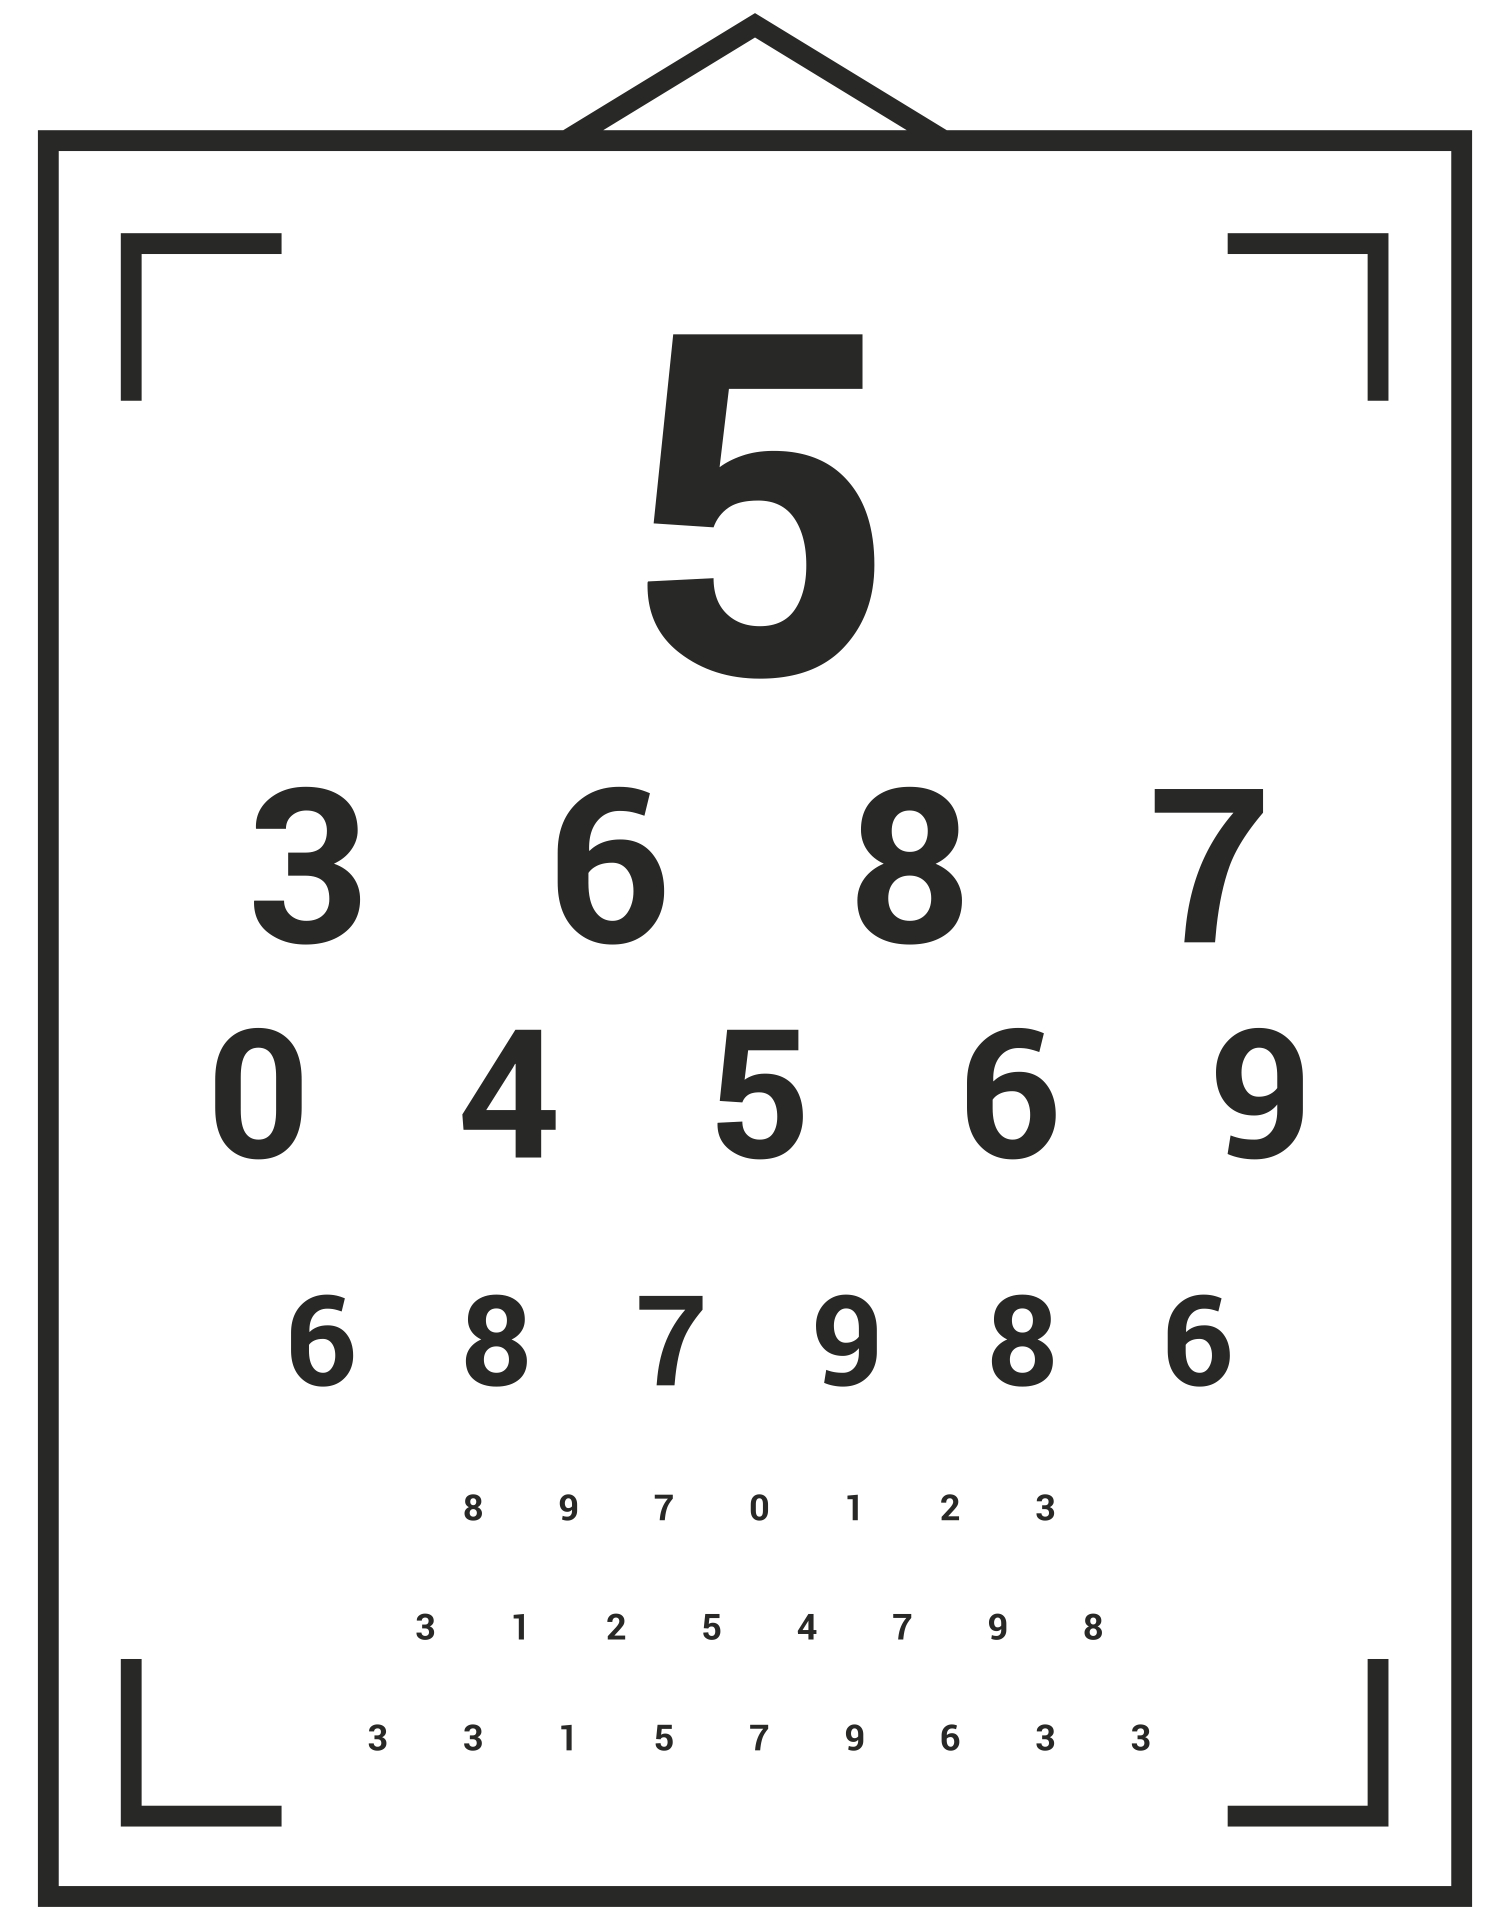 48-printable-eye-chart-for-vision-test-pics-printables-collection-eye-test-chart-gallery-of